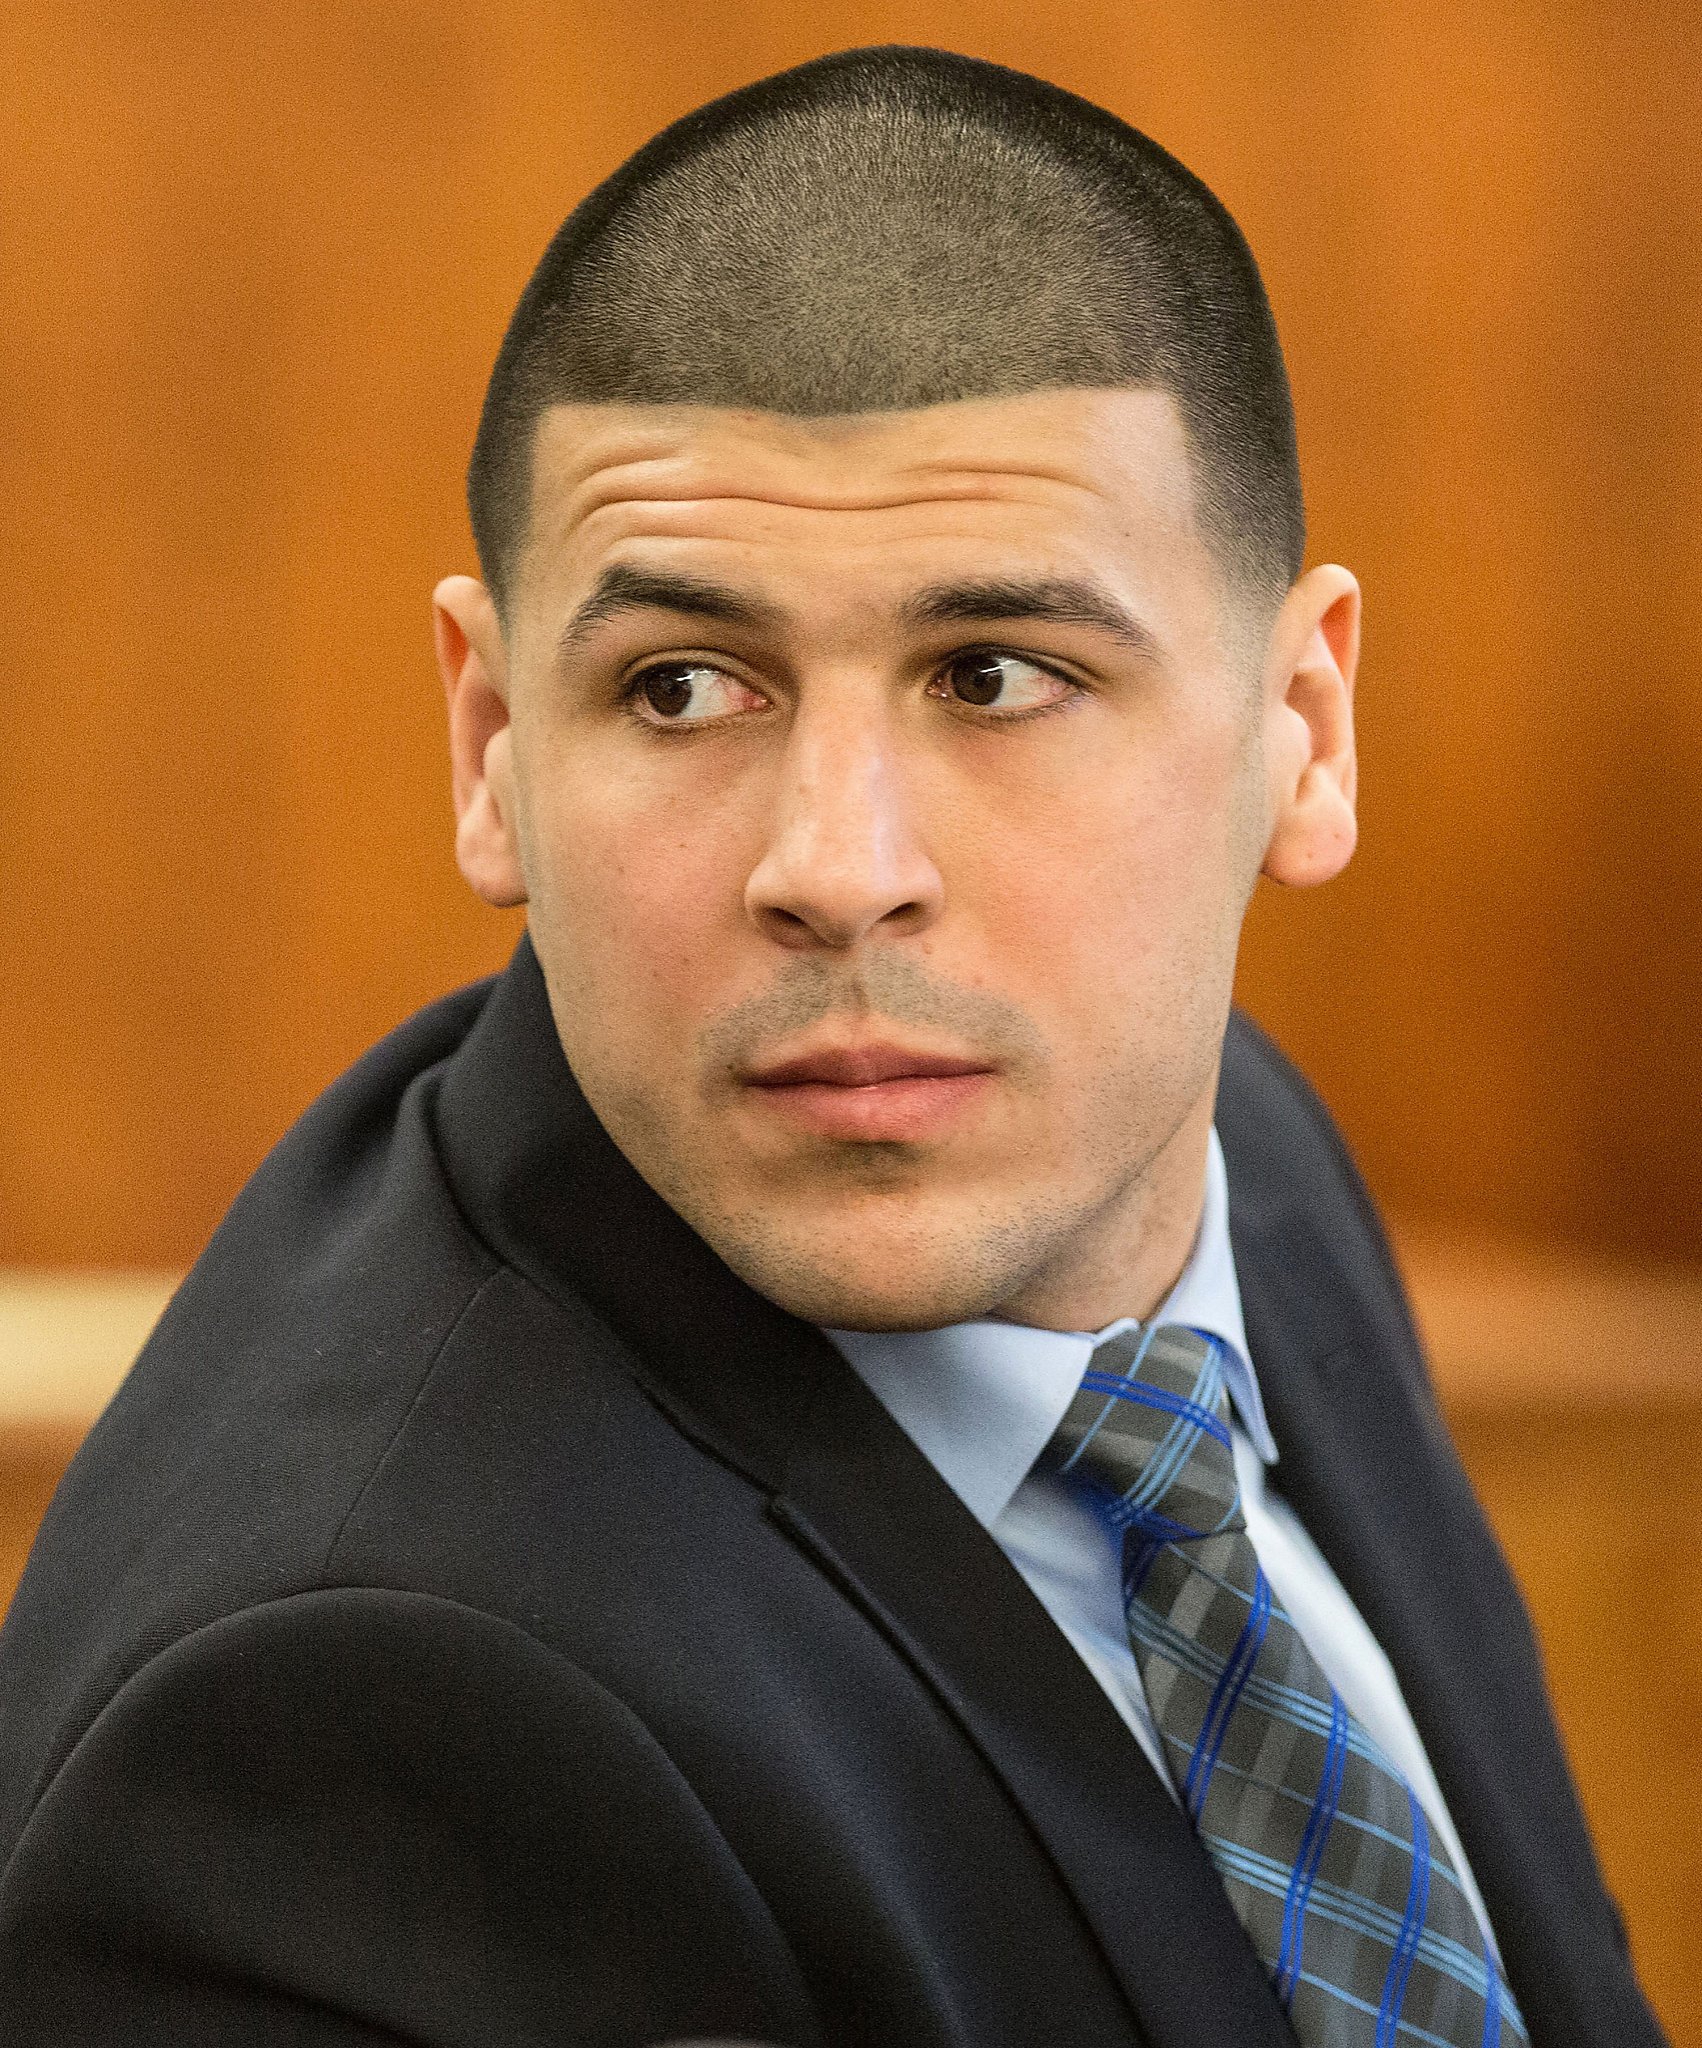 Will NFL learn from Aaron Hernandez tragedy?  San Francisco Chronicle